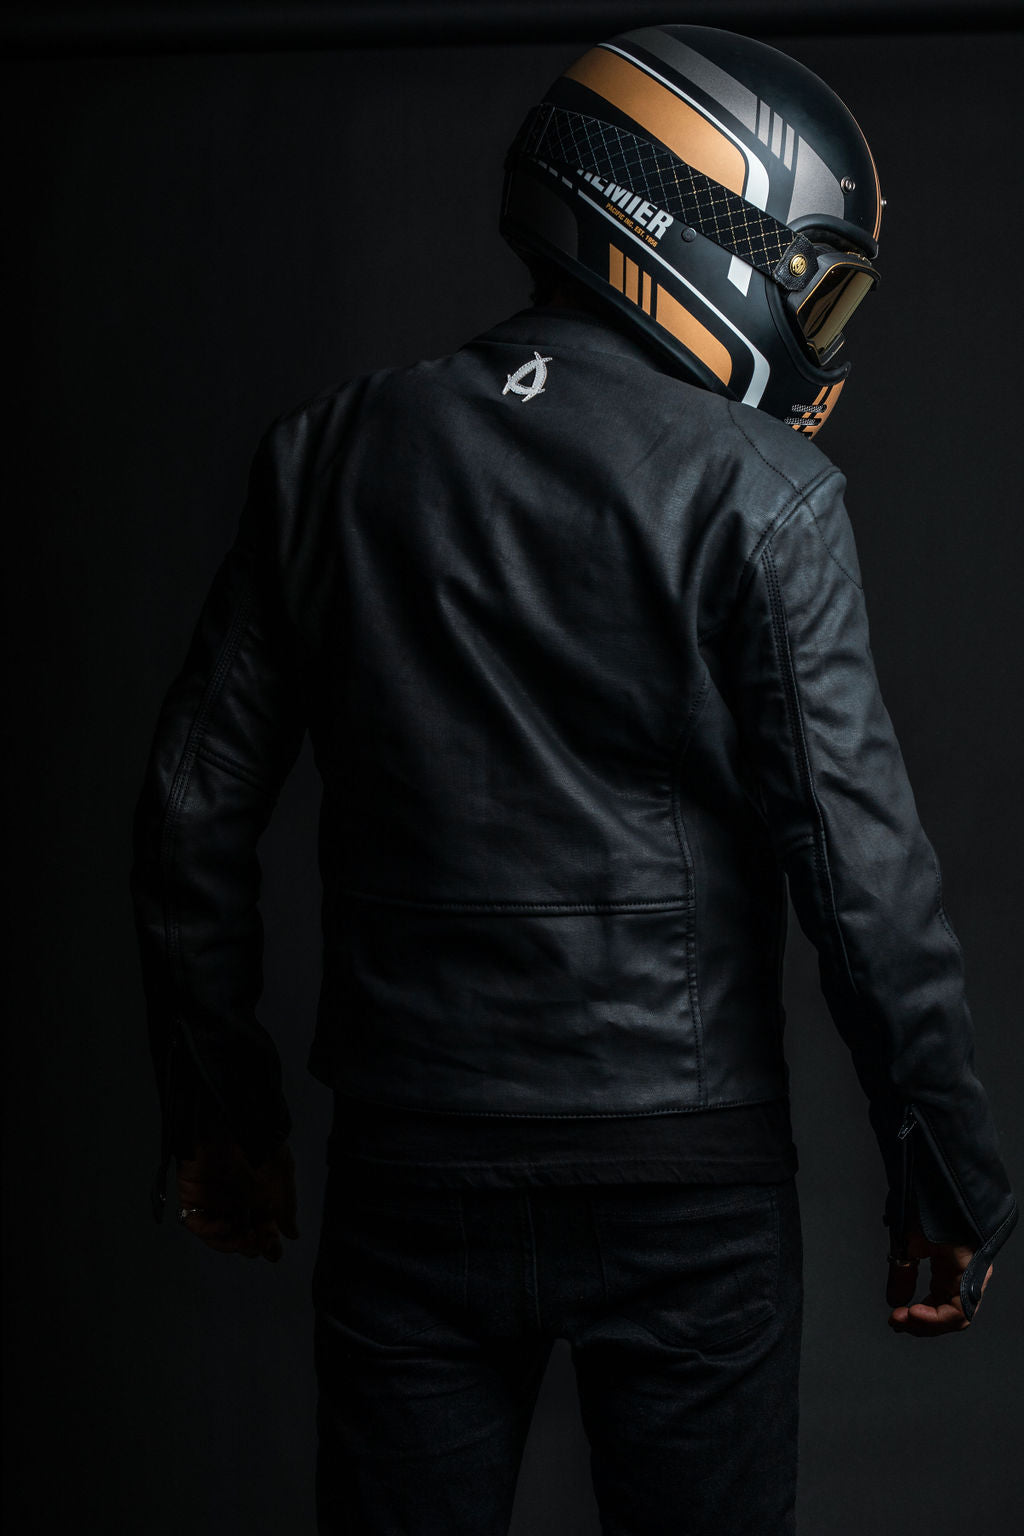 Neowise 2 Non-leather motorcycle jacket